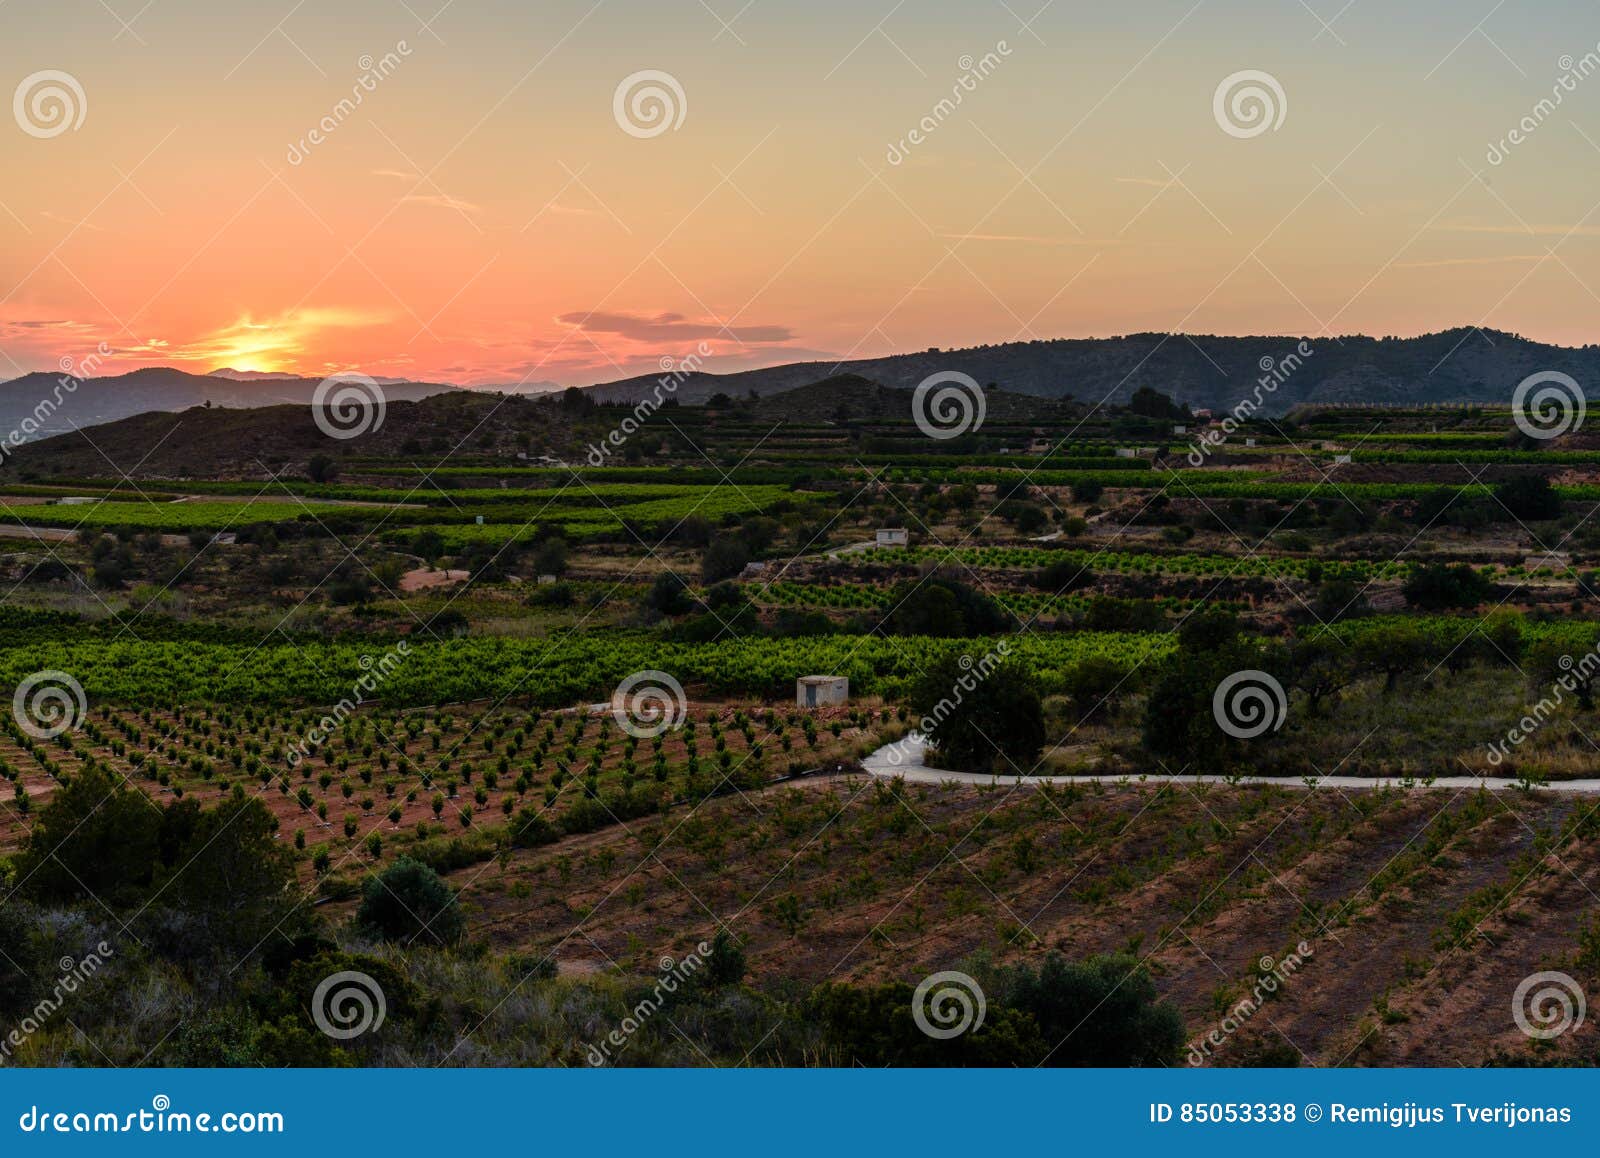 Peach Fields at Dusk in Valencia Stock Photo - Image of peach